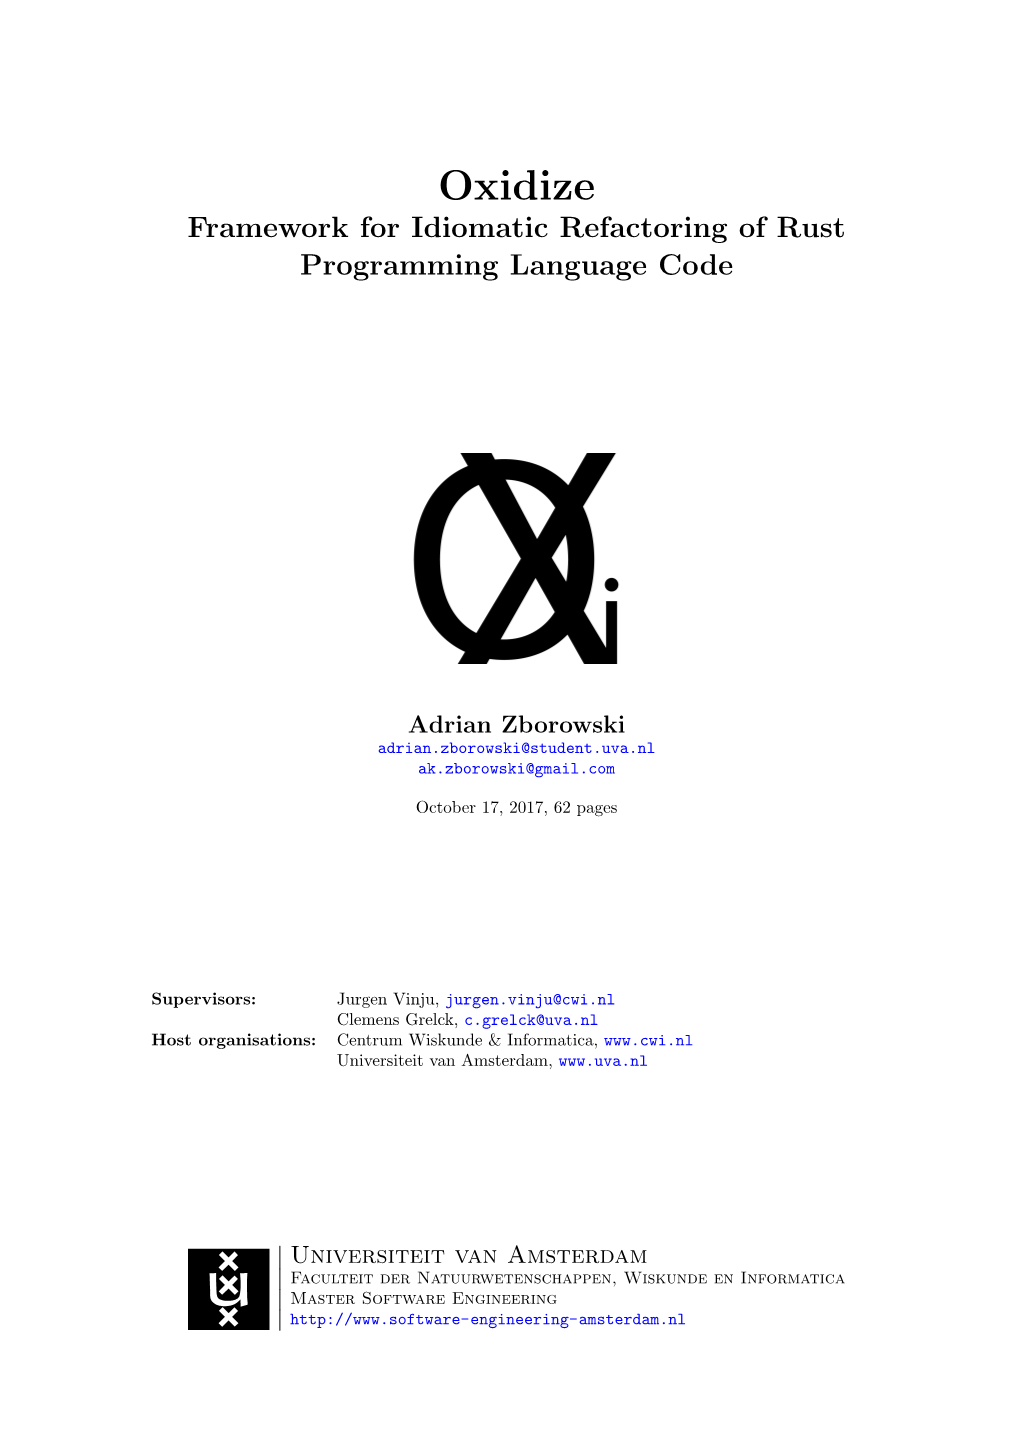 Oxidize Framework for Idiomatic Refactoring of Rust Programming Language Code